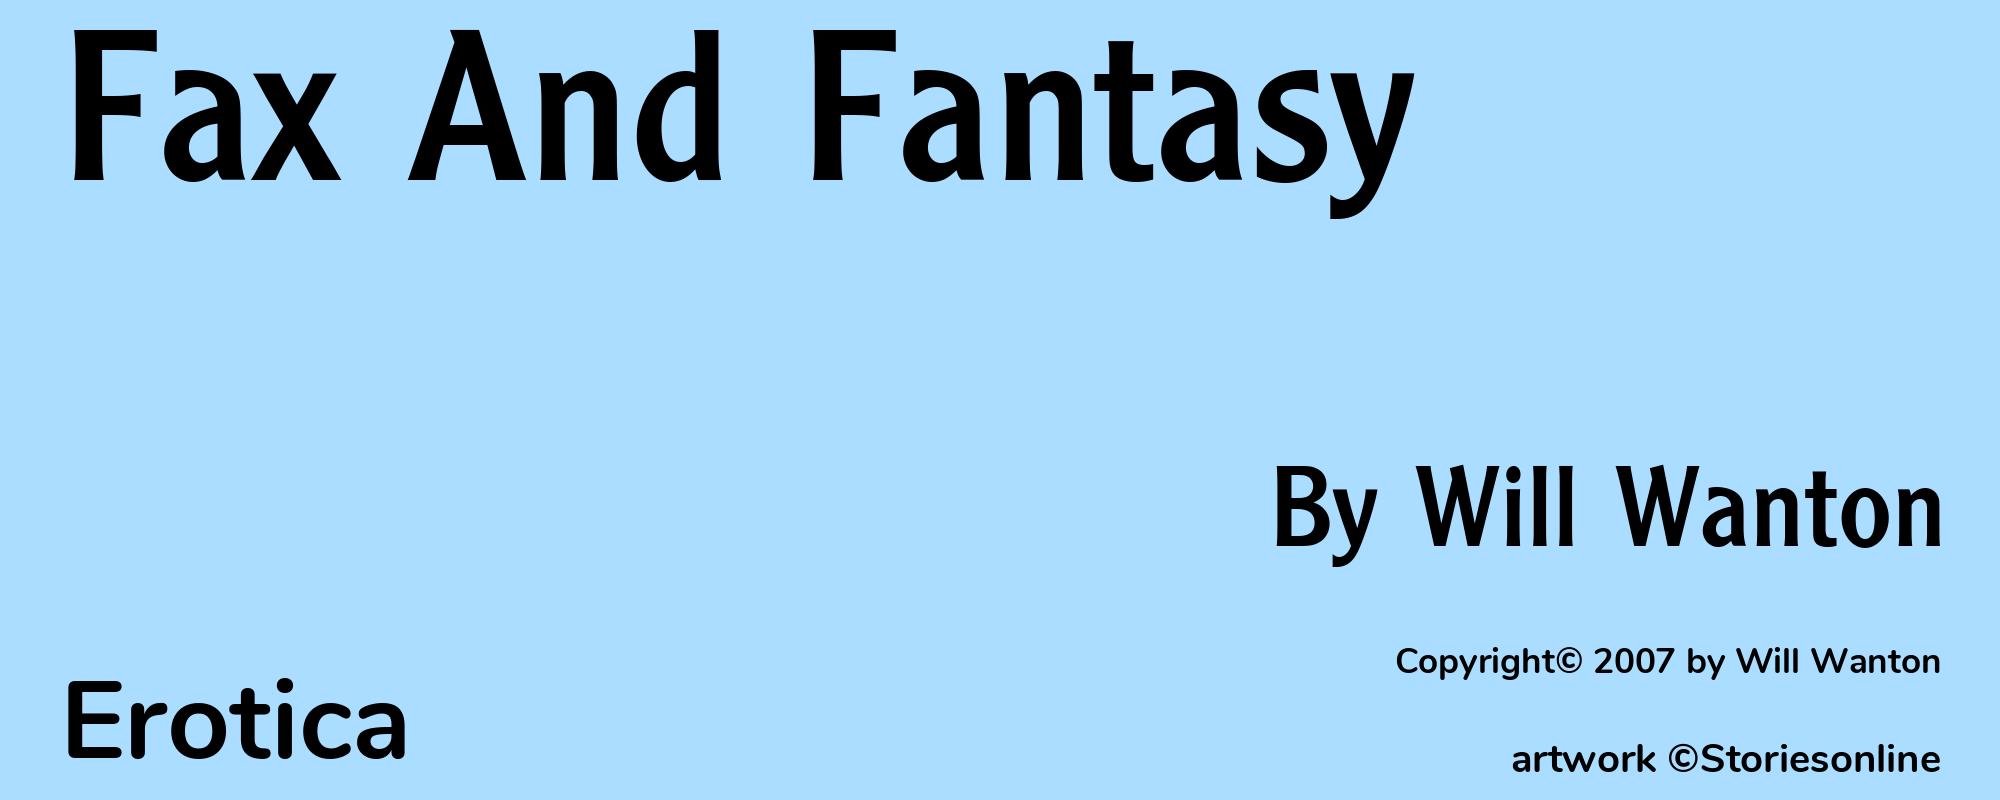 Fax And Fantasy - Cover